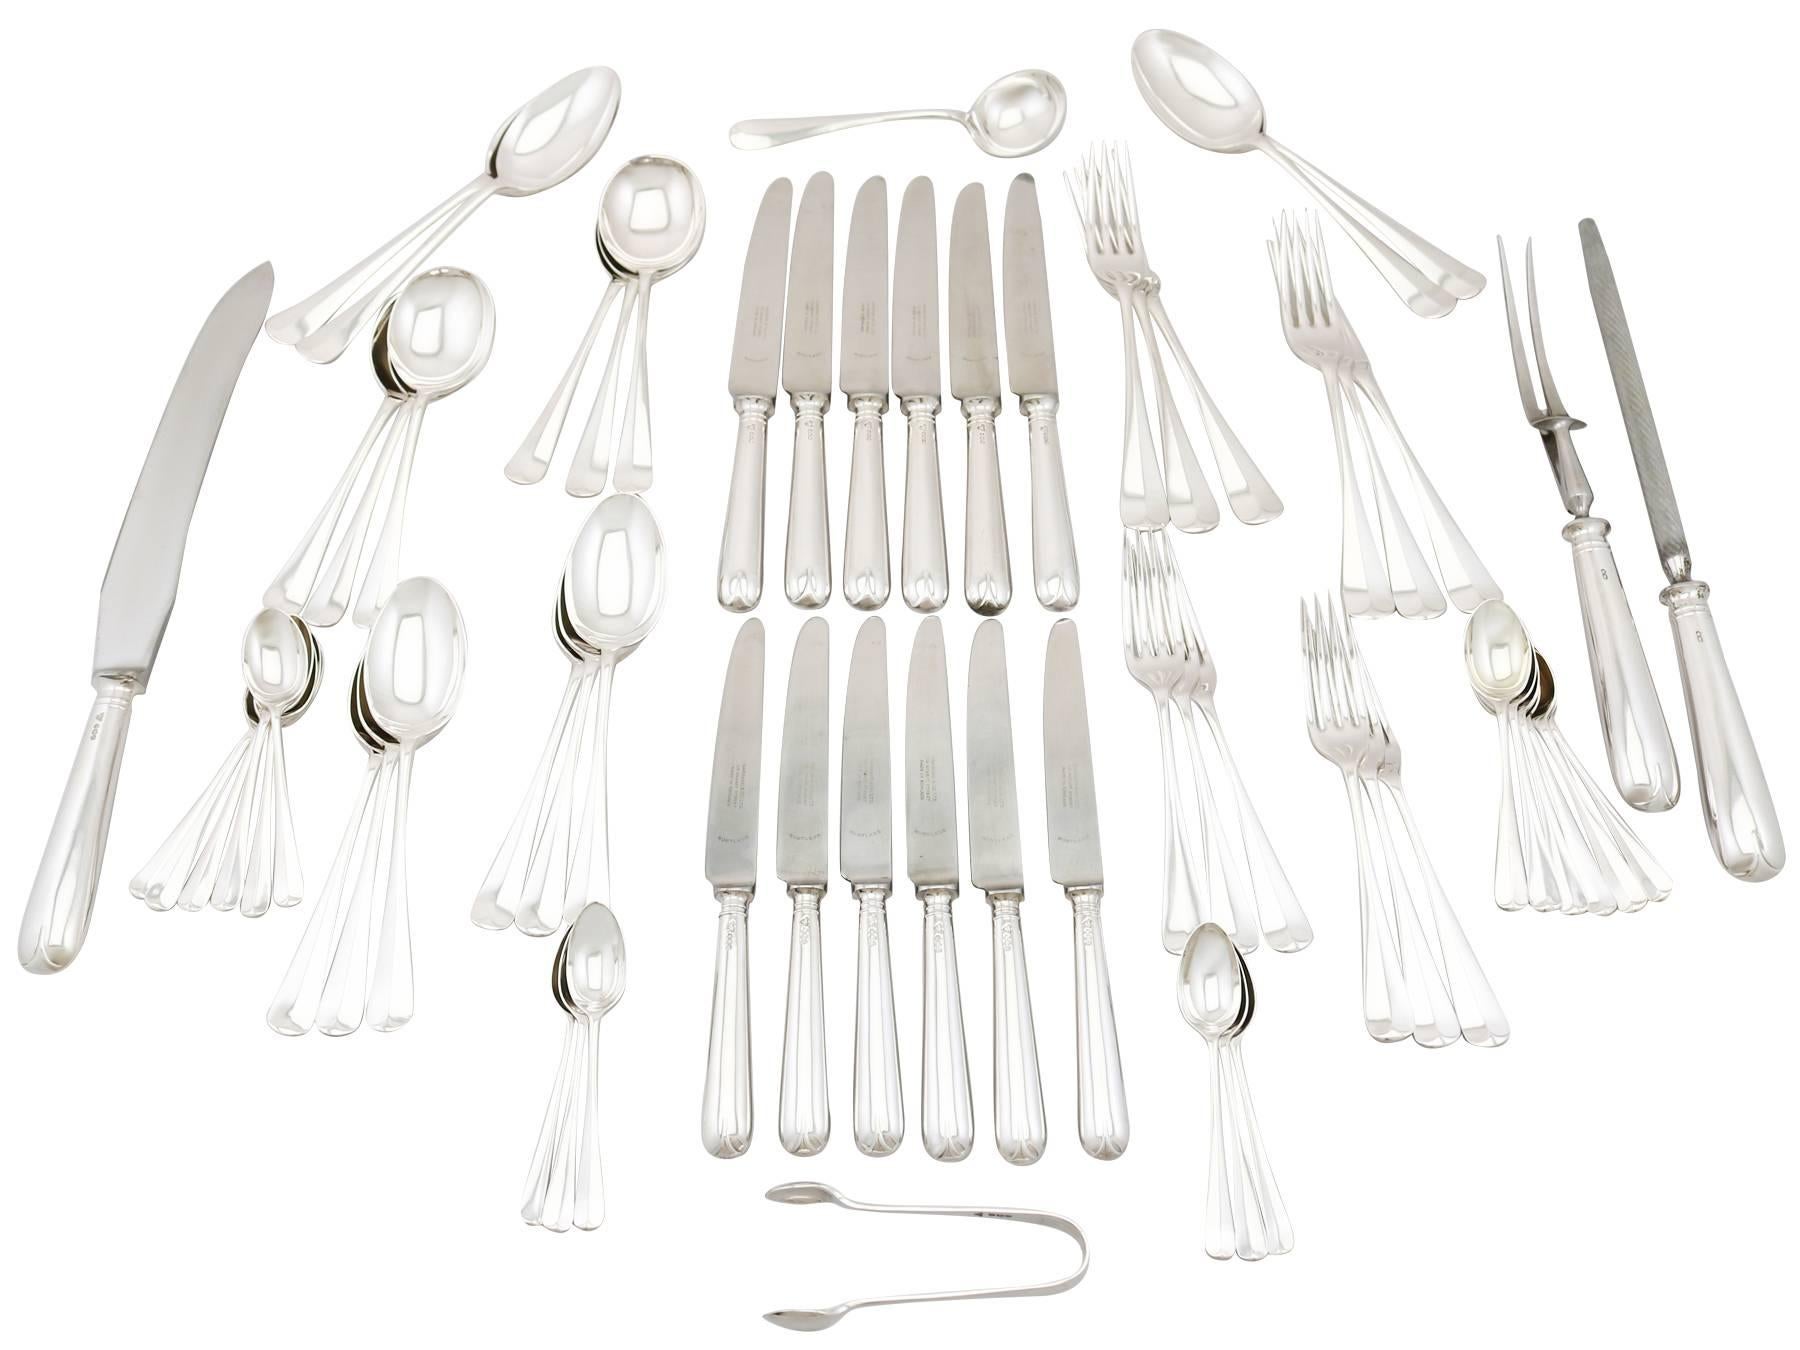 An exceptional, fine and impressive vintage Elizabeth II English sterling silver flatware service for six persons by Garrard & Co Ltd - boxed; an addition to our canteen of cutlery collection.

The pieces of this impressive, vintage sterling